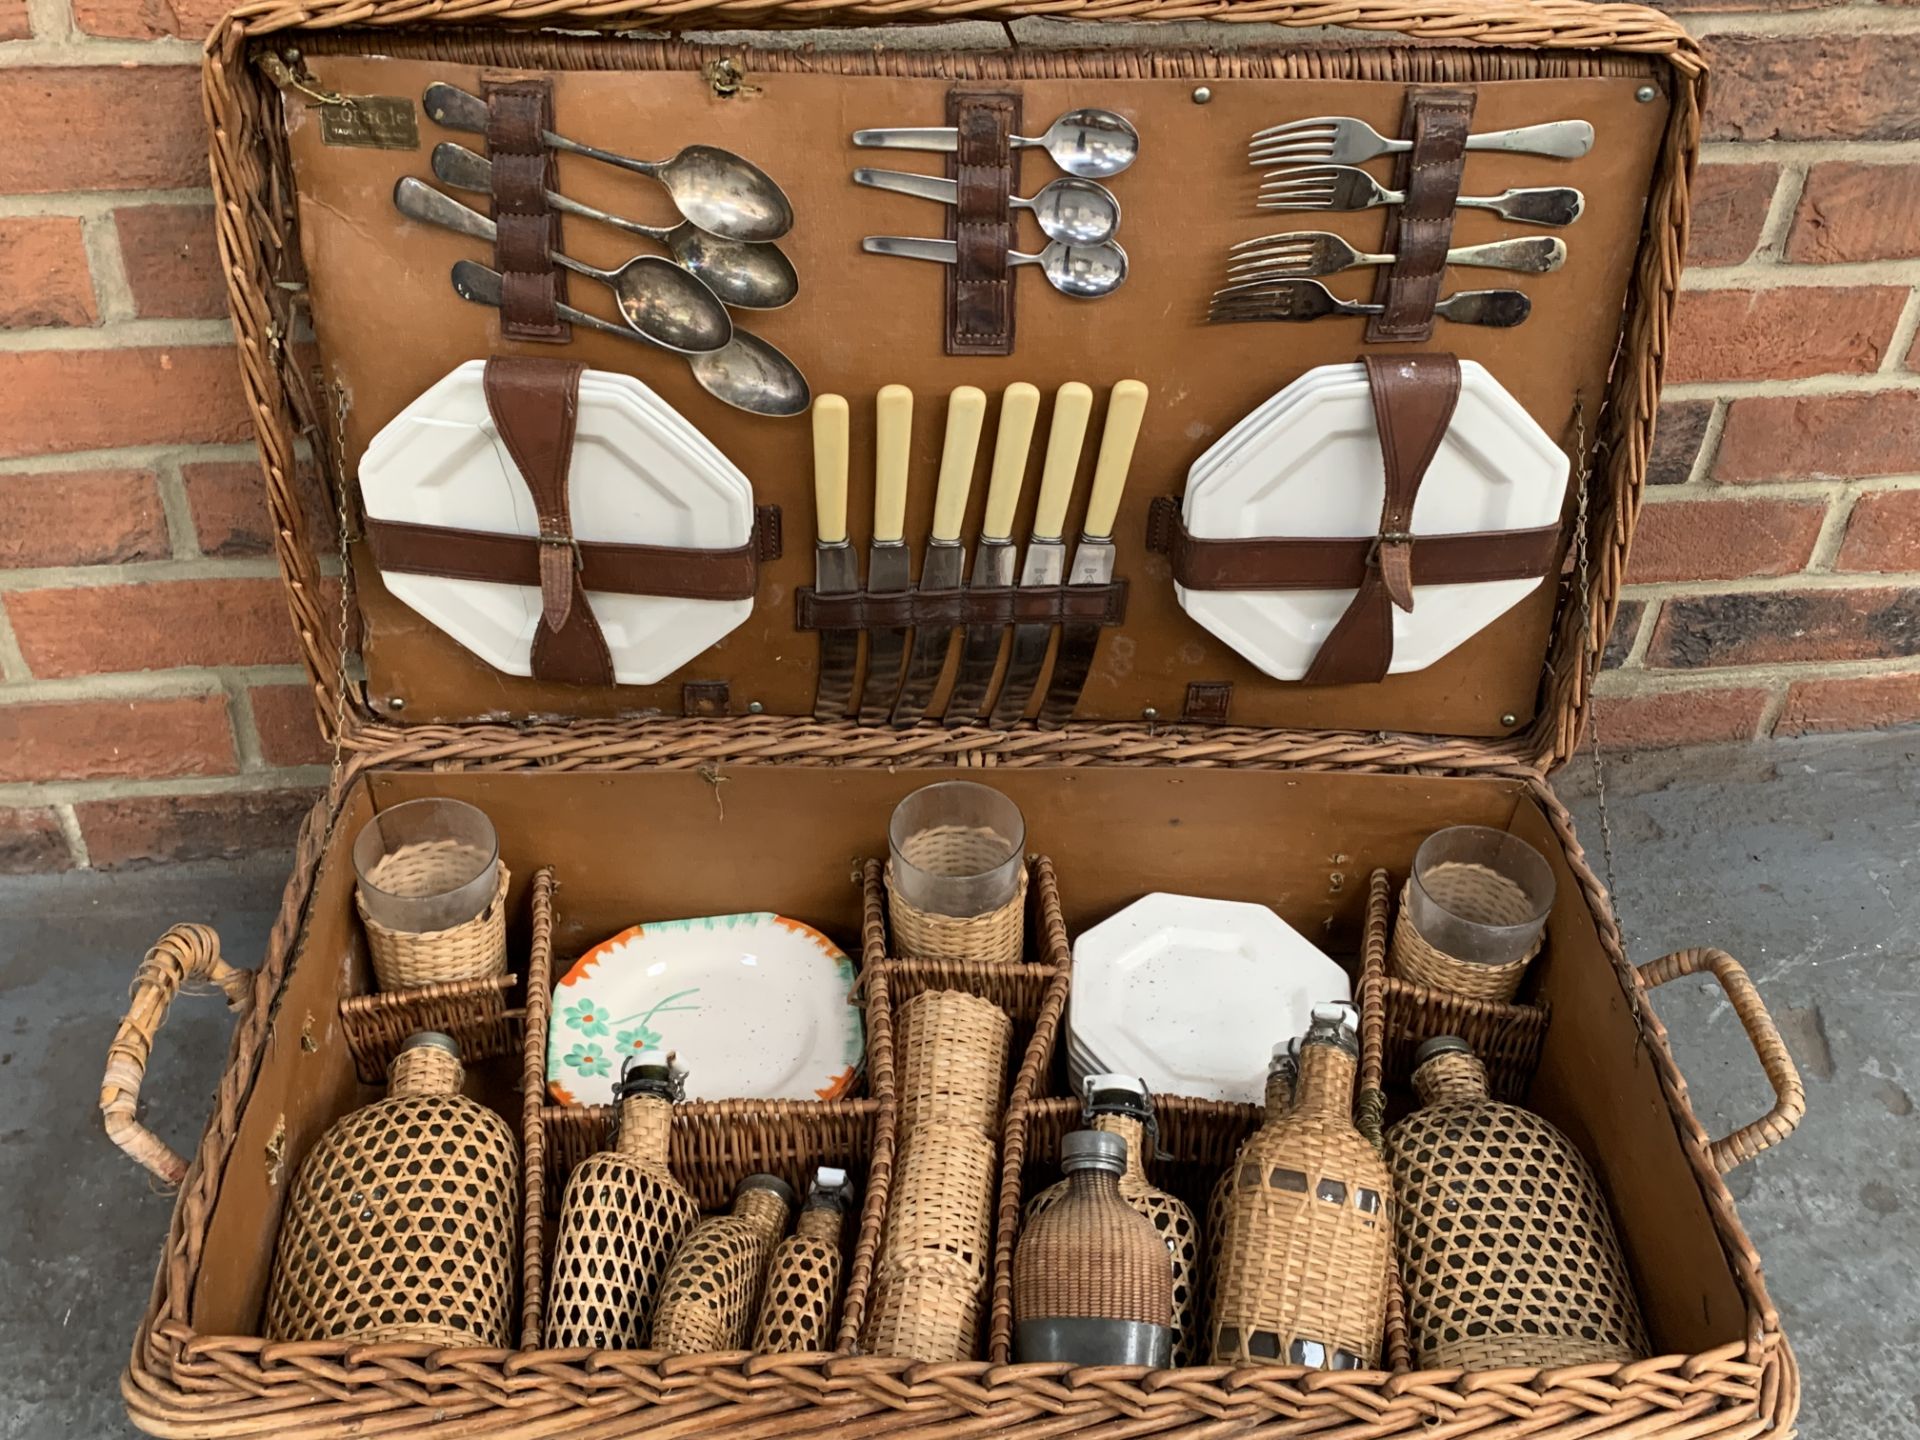 Vintage Wicker Picnic Basket with Contents - Image 3 of 4